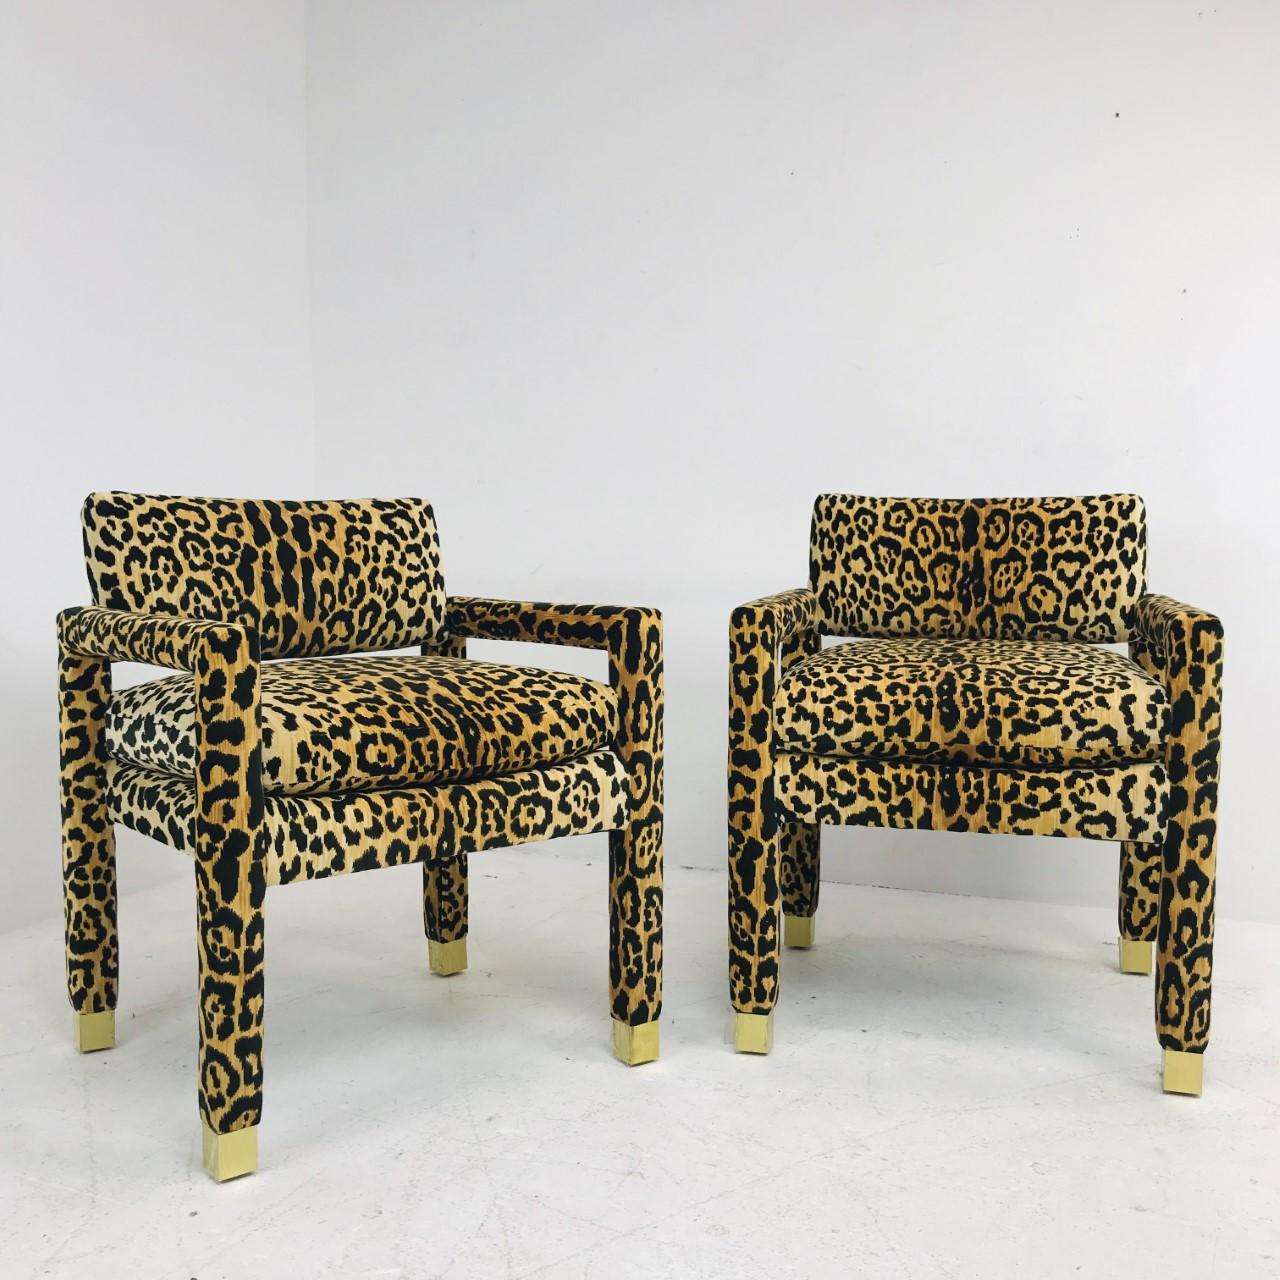 20th Century Pair of Milo Baughman Leopard Parsons Chairs with Brass Sabots